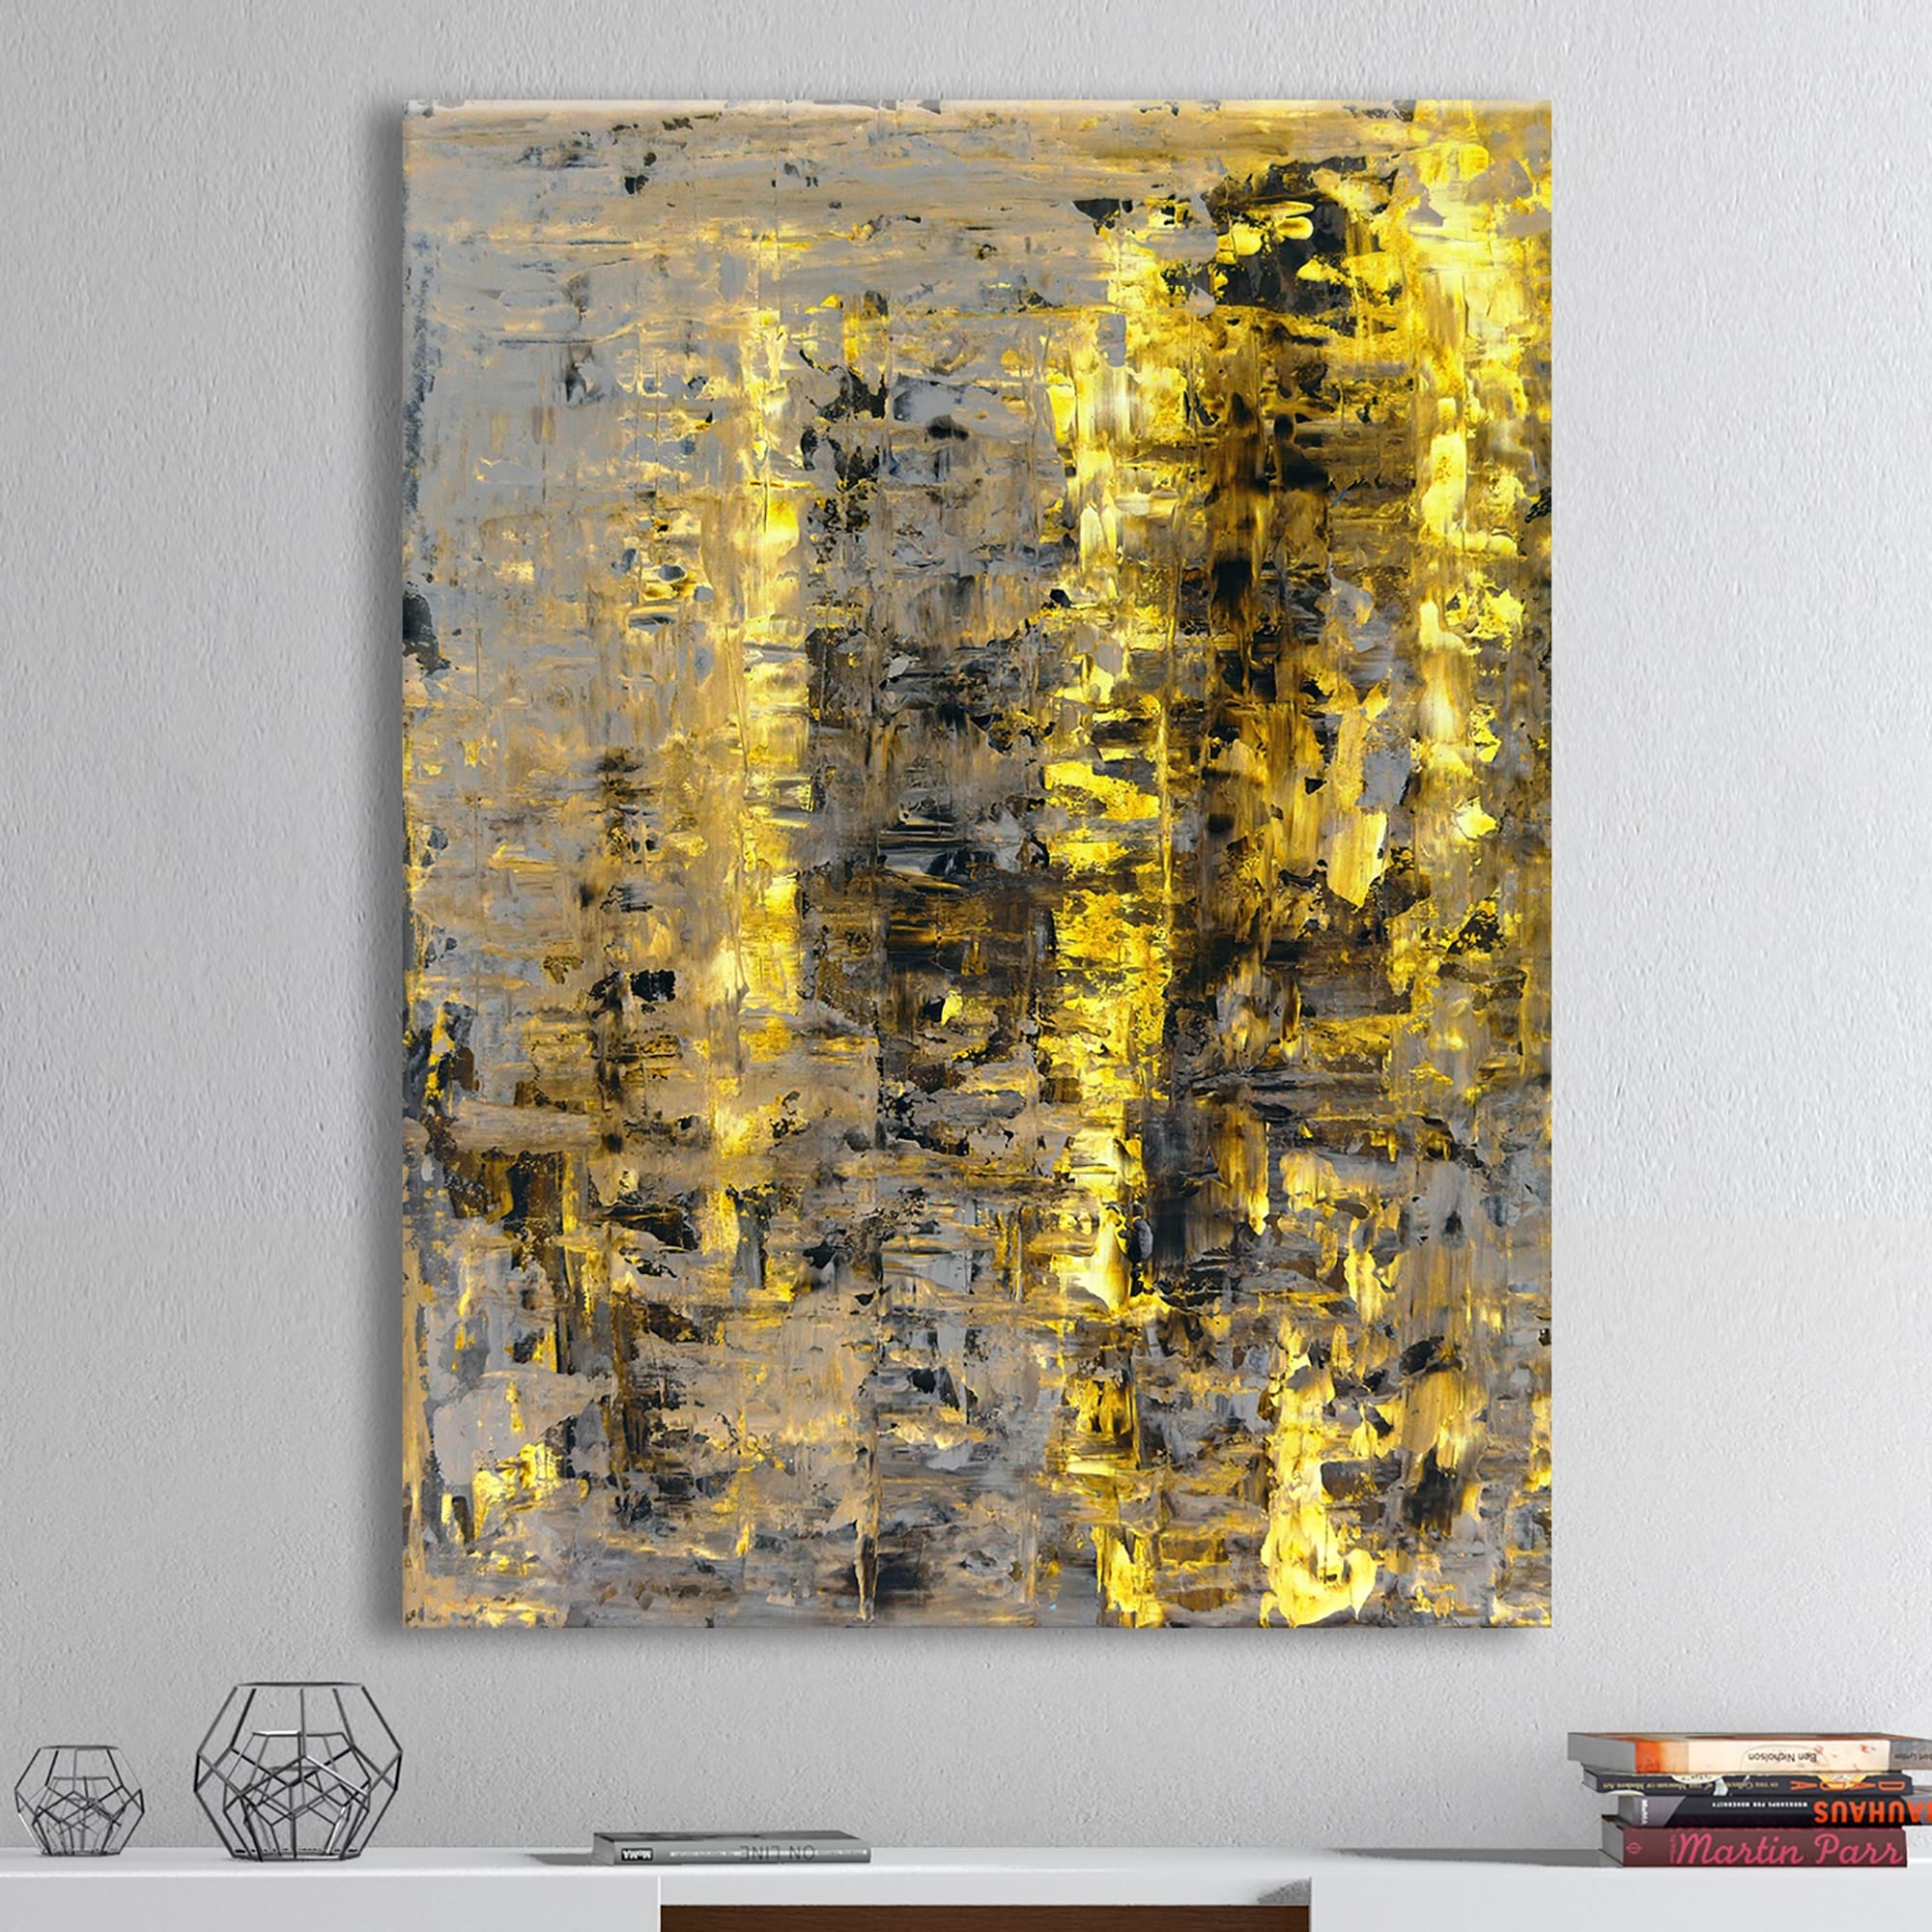 ABSTRACT FLORAL ART PICTURE YELLOW AND CREAM CIRCLES CANVAS SPLIT PANELS 112cm 